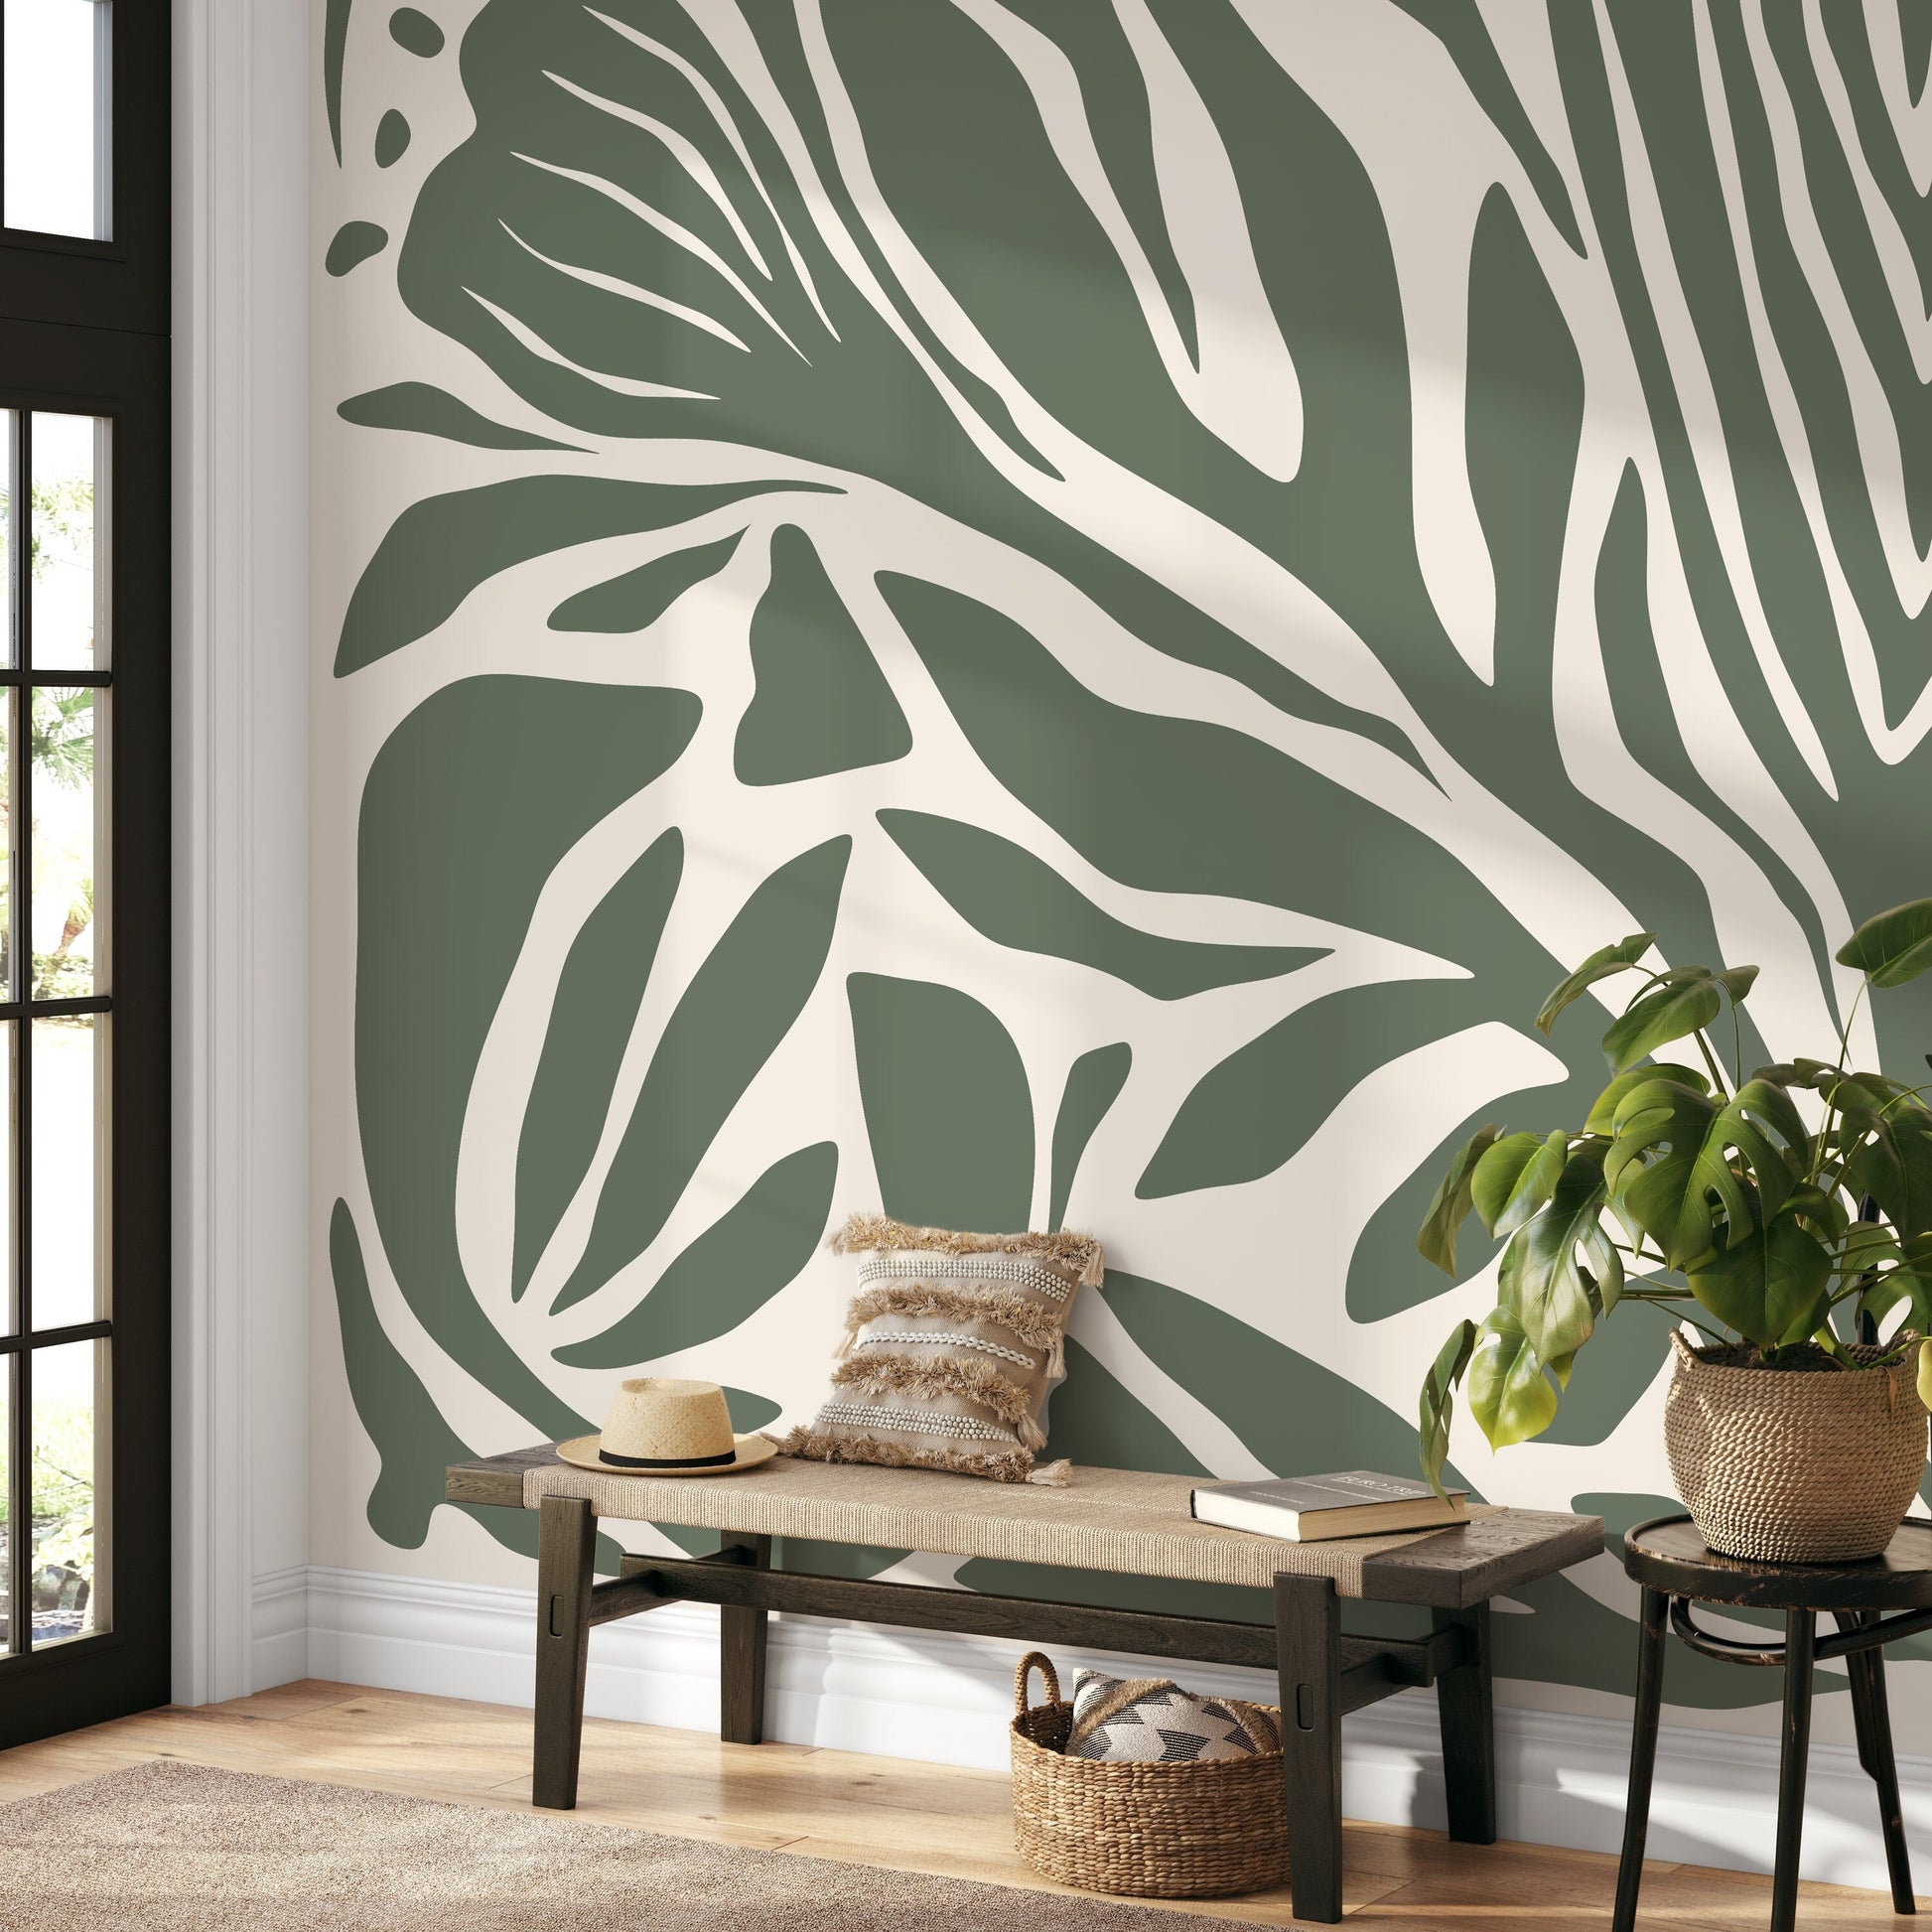 Olive Green Abstract Wallpaper Contemporary Mural Peel and Stick and Traditional Wallpaper - D691